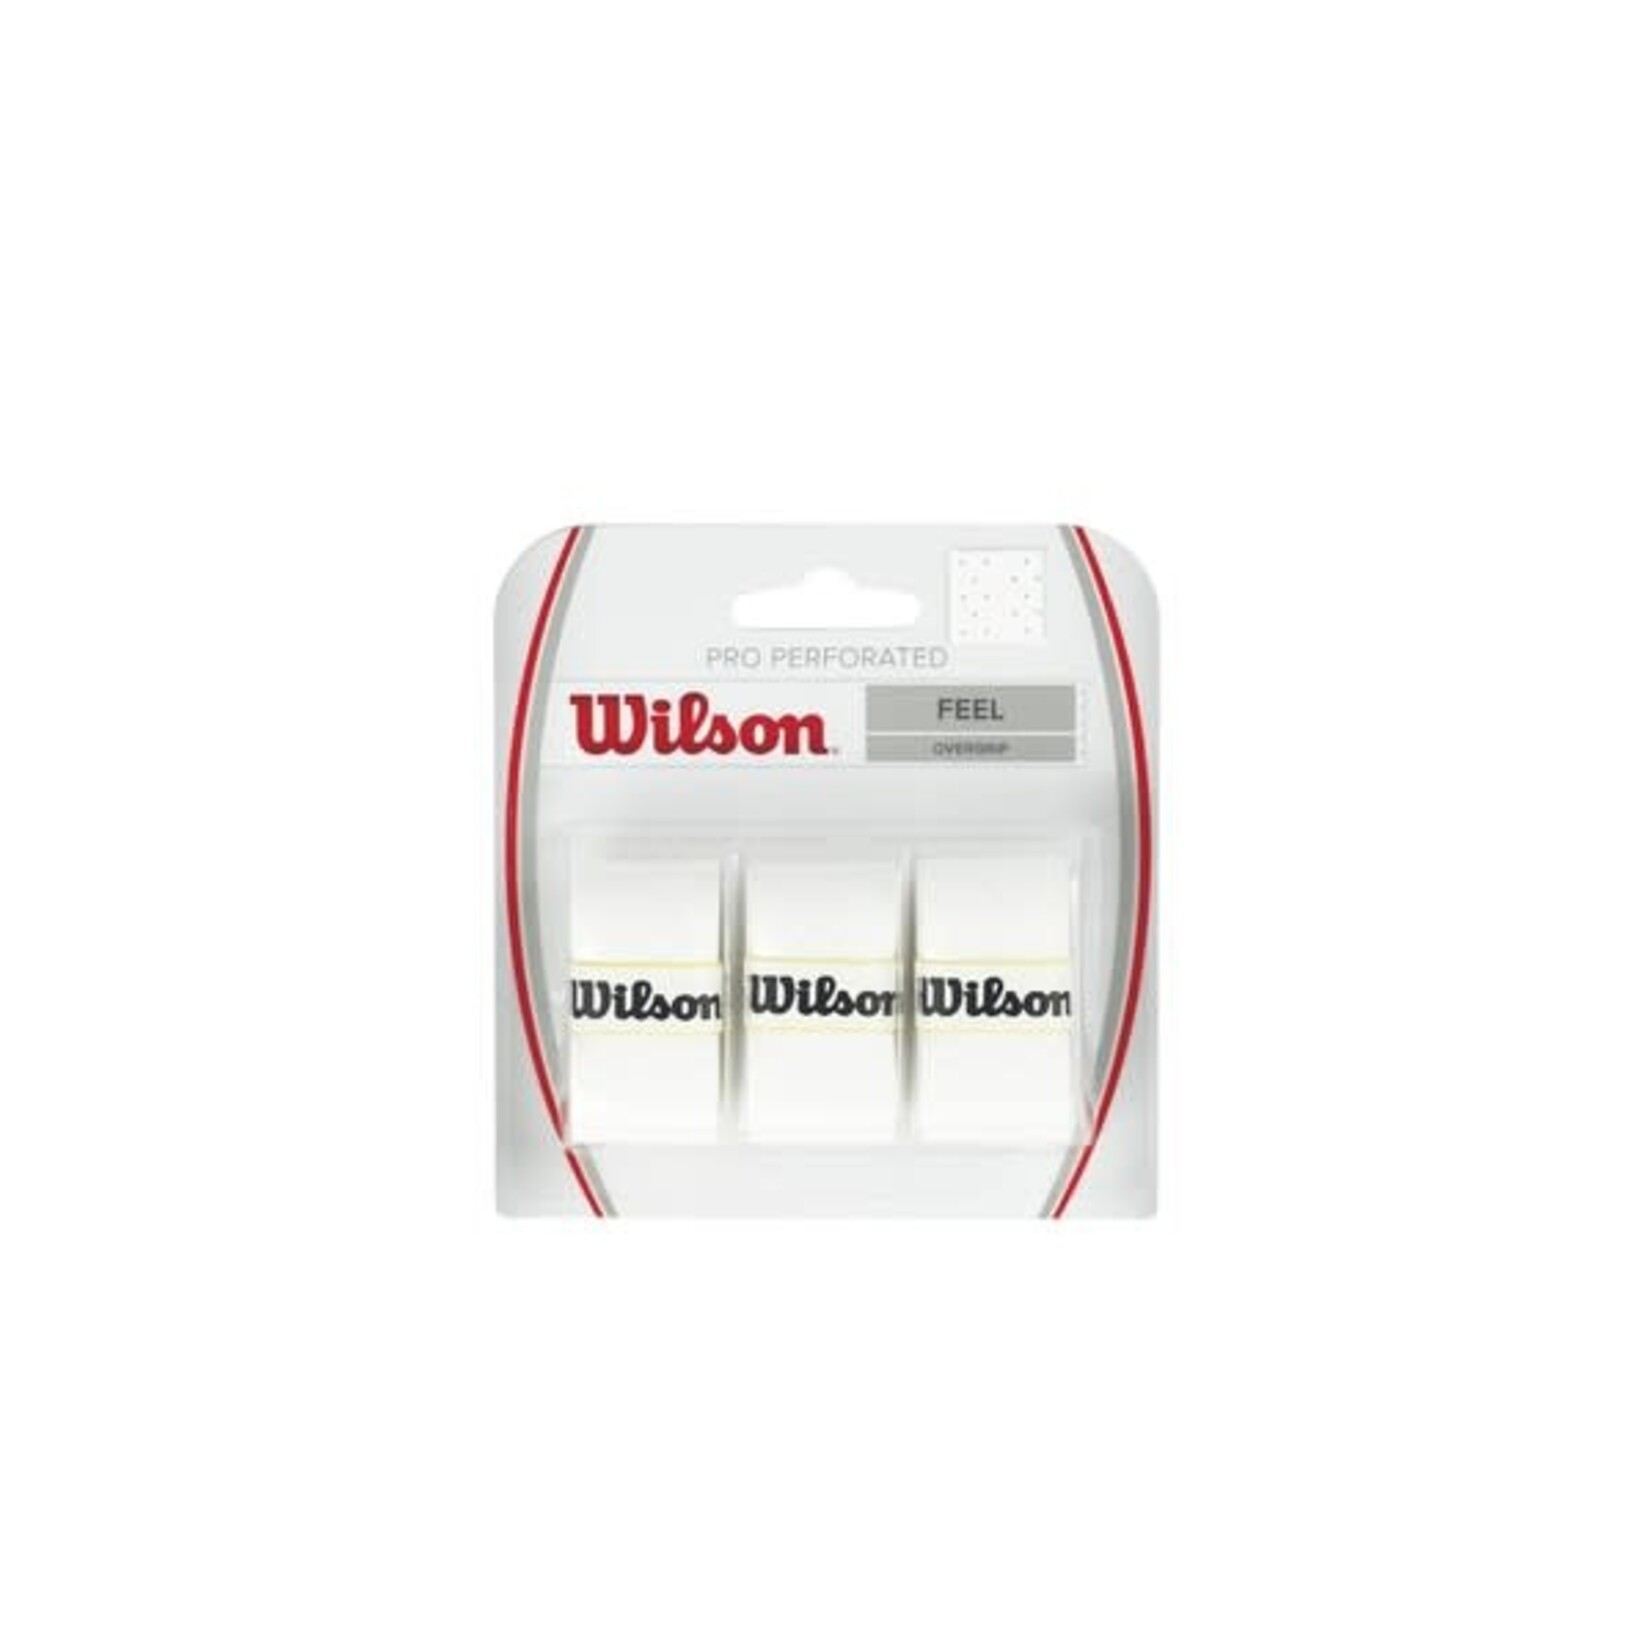 Wilson Pro OverGrip Perforated Wit